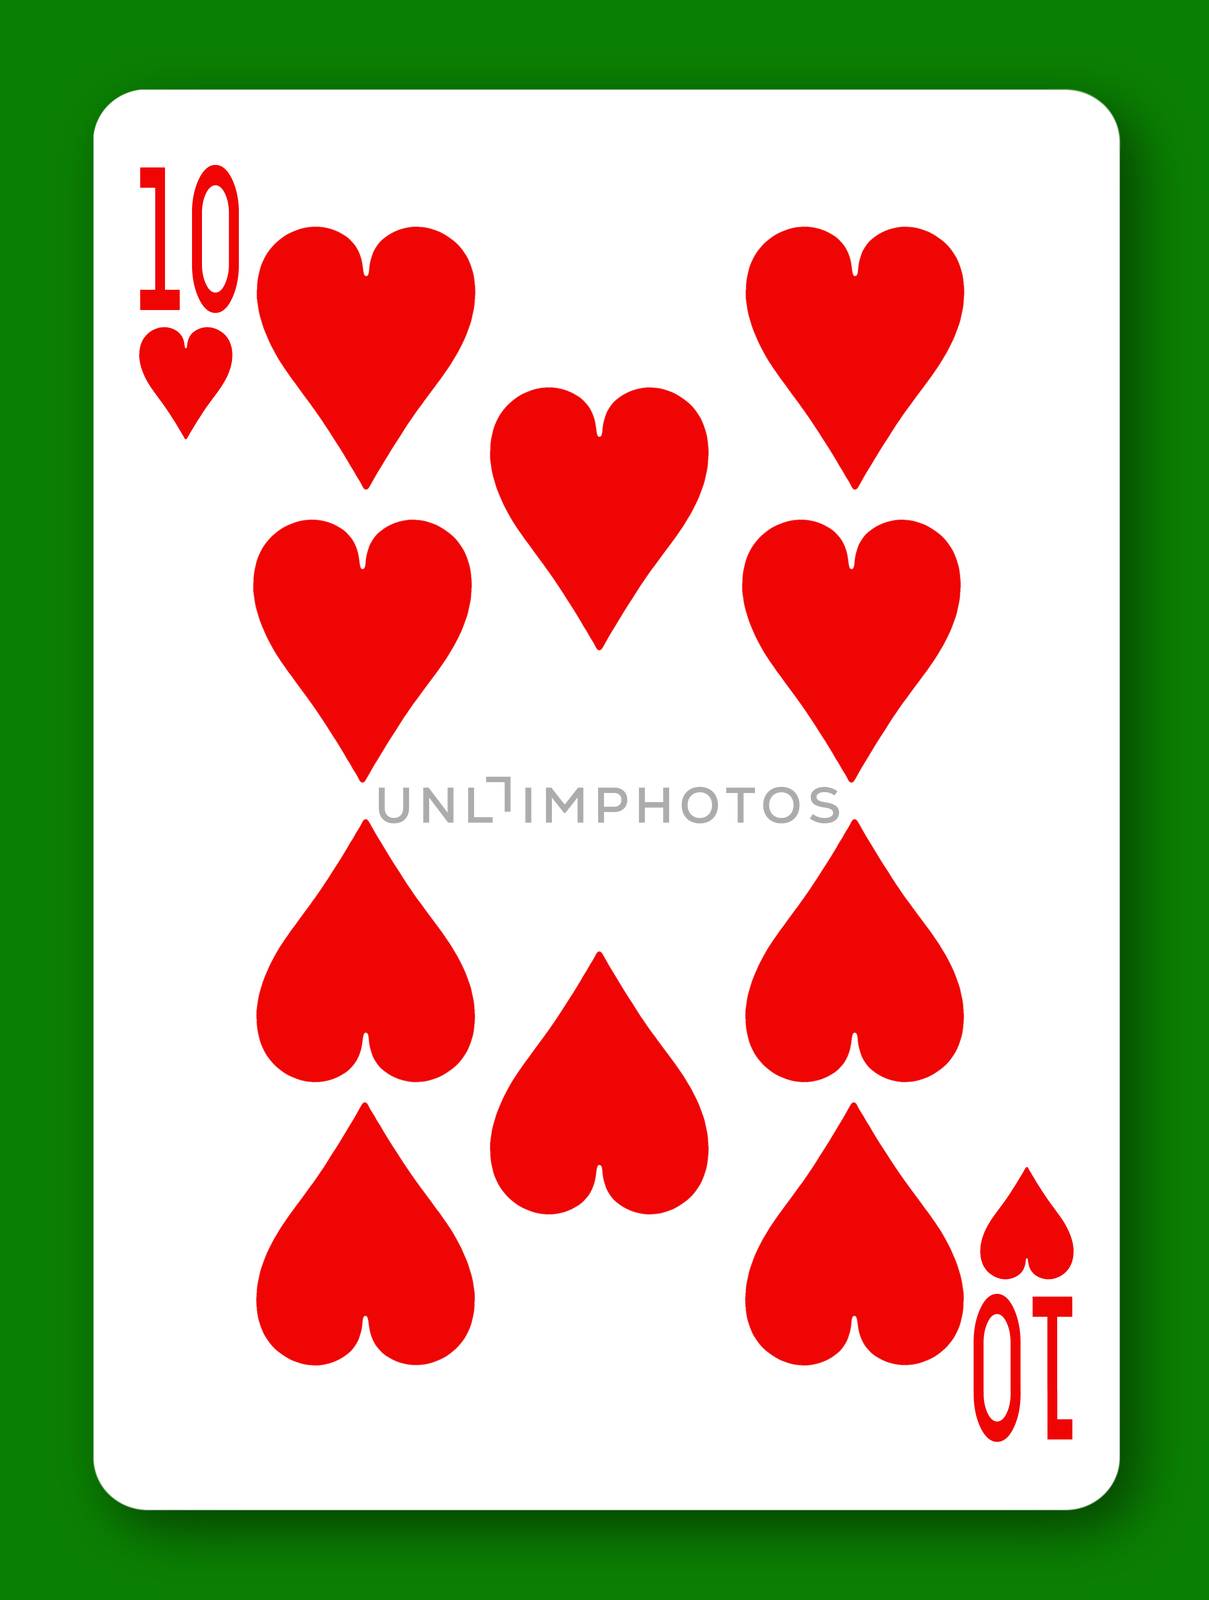 A 10 Ten of Hearts playing card with clipping path to remove background and shadow